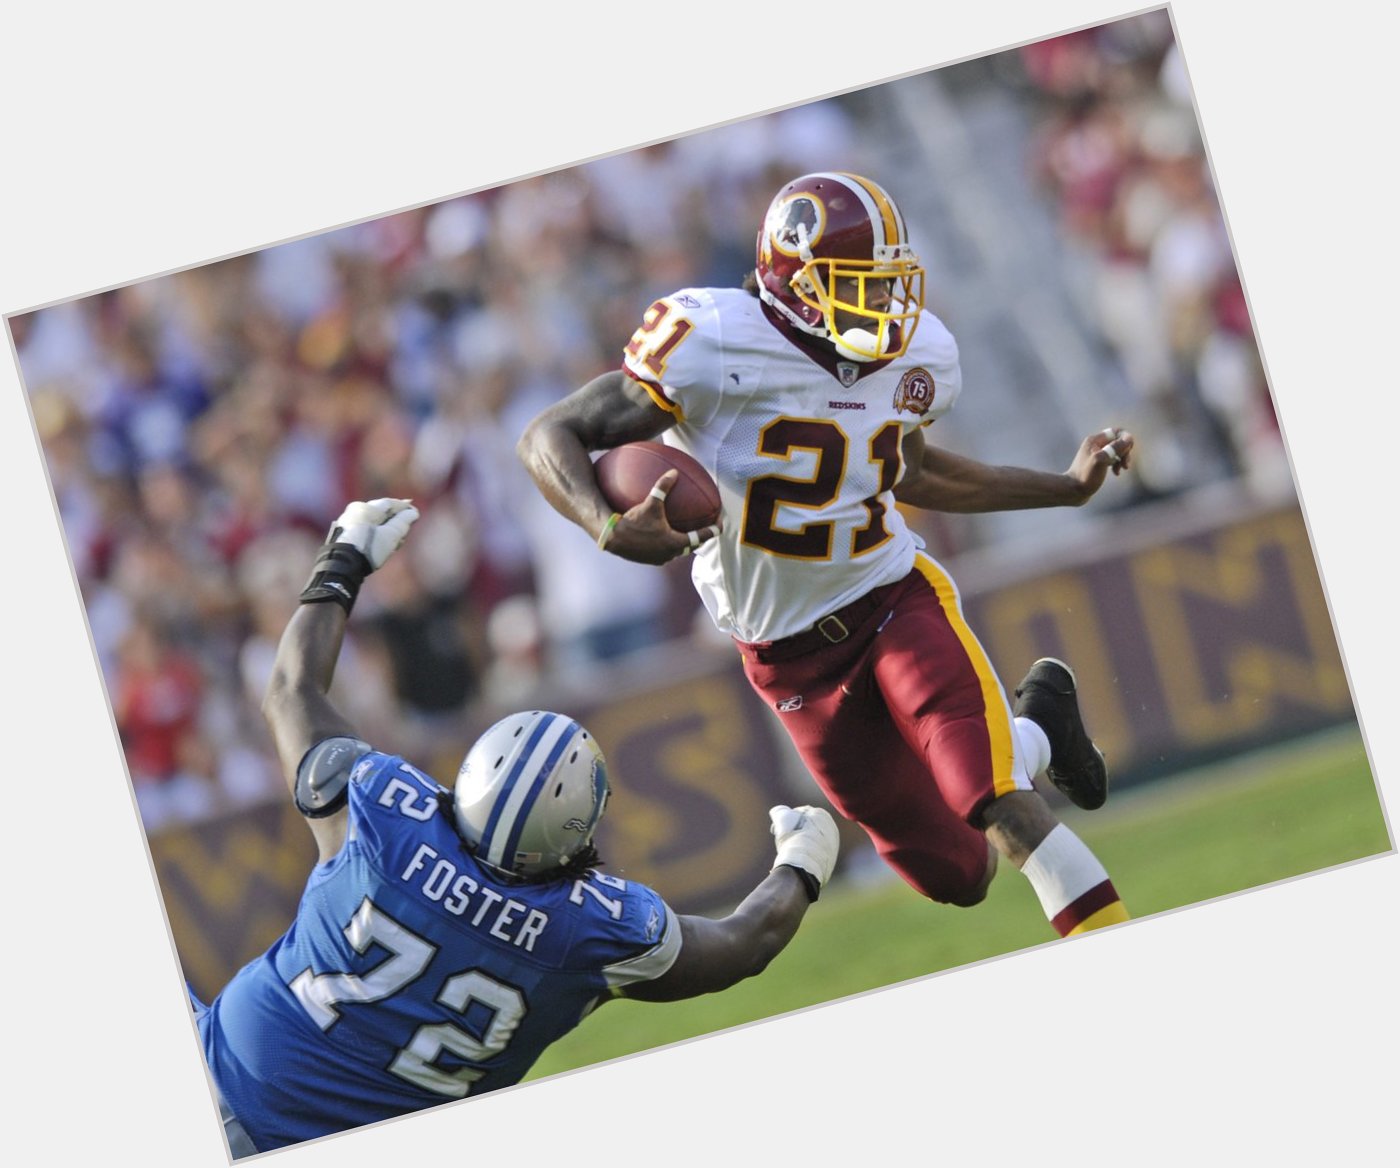 Happy Birthday to Sean Taylor, who would have turned 34 today! 